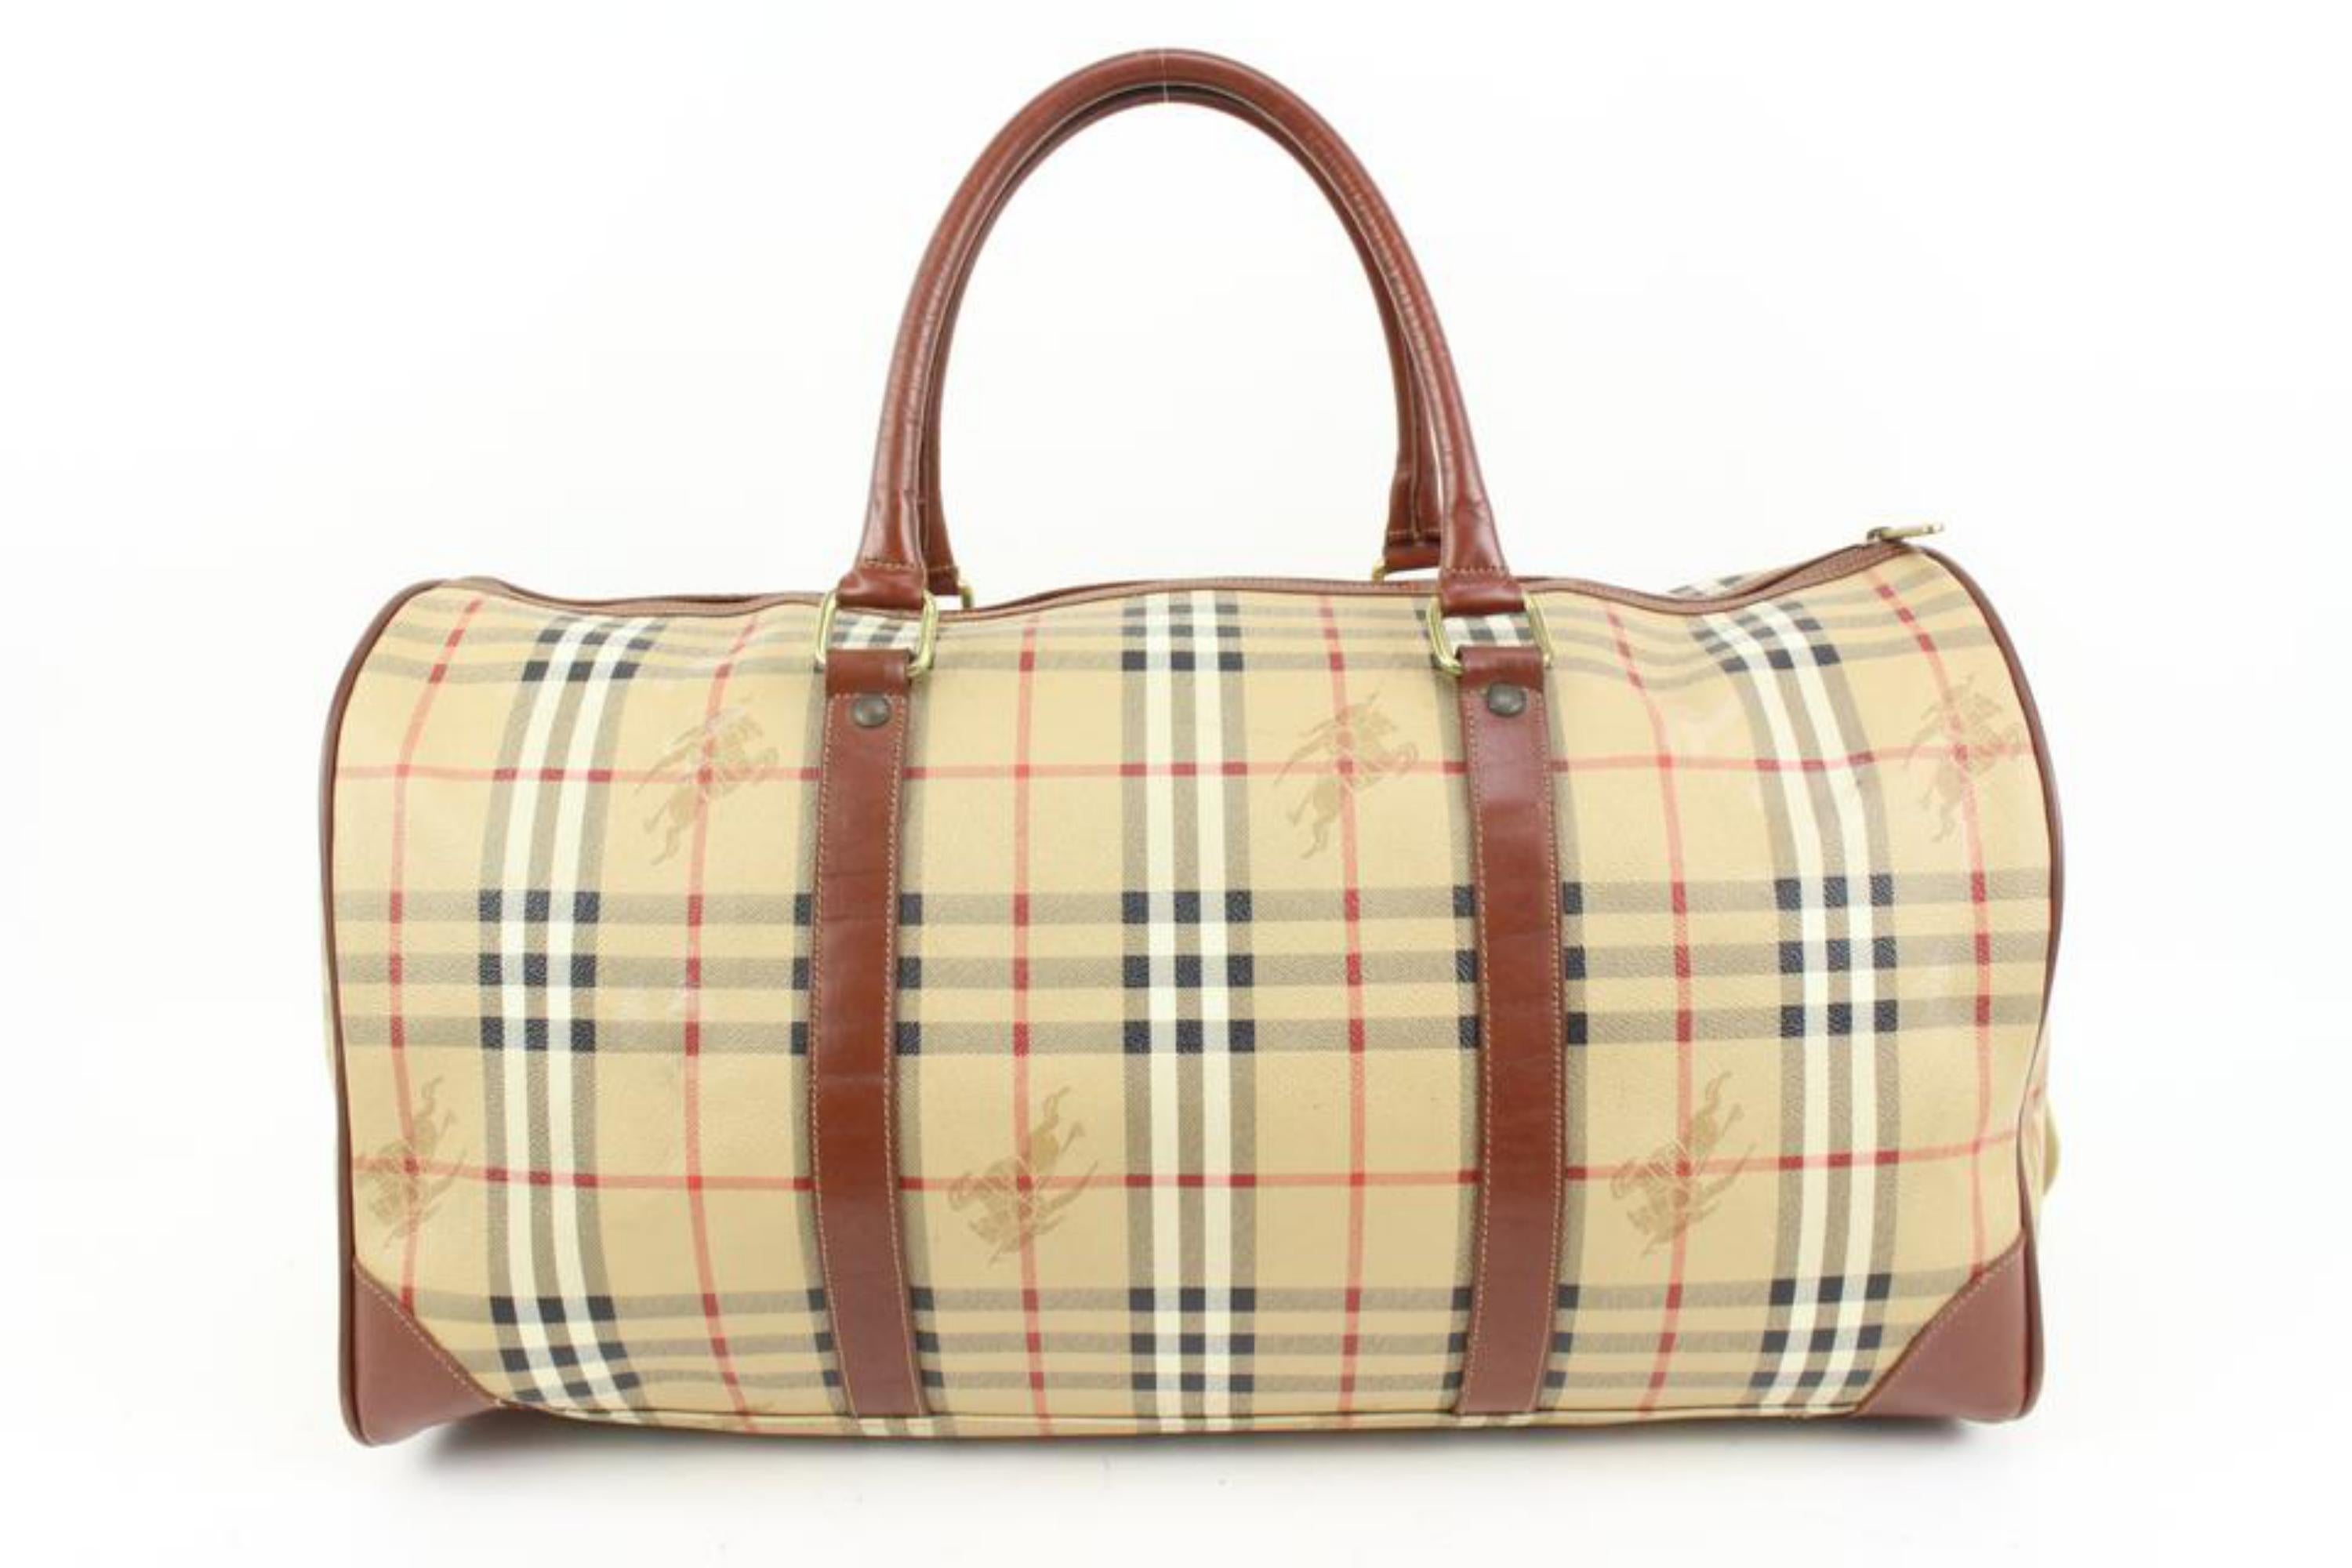 Burberry Beige Nova Check Duffle Bag with Strap Boston Upcycle ready 65b421s For Sale 1